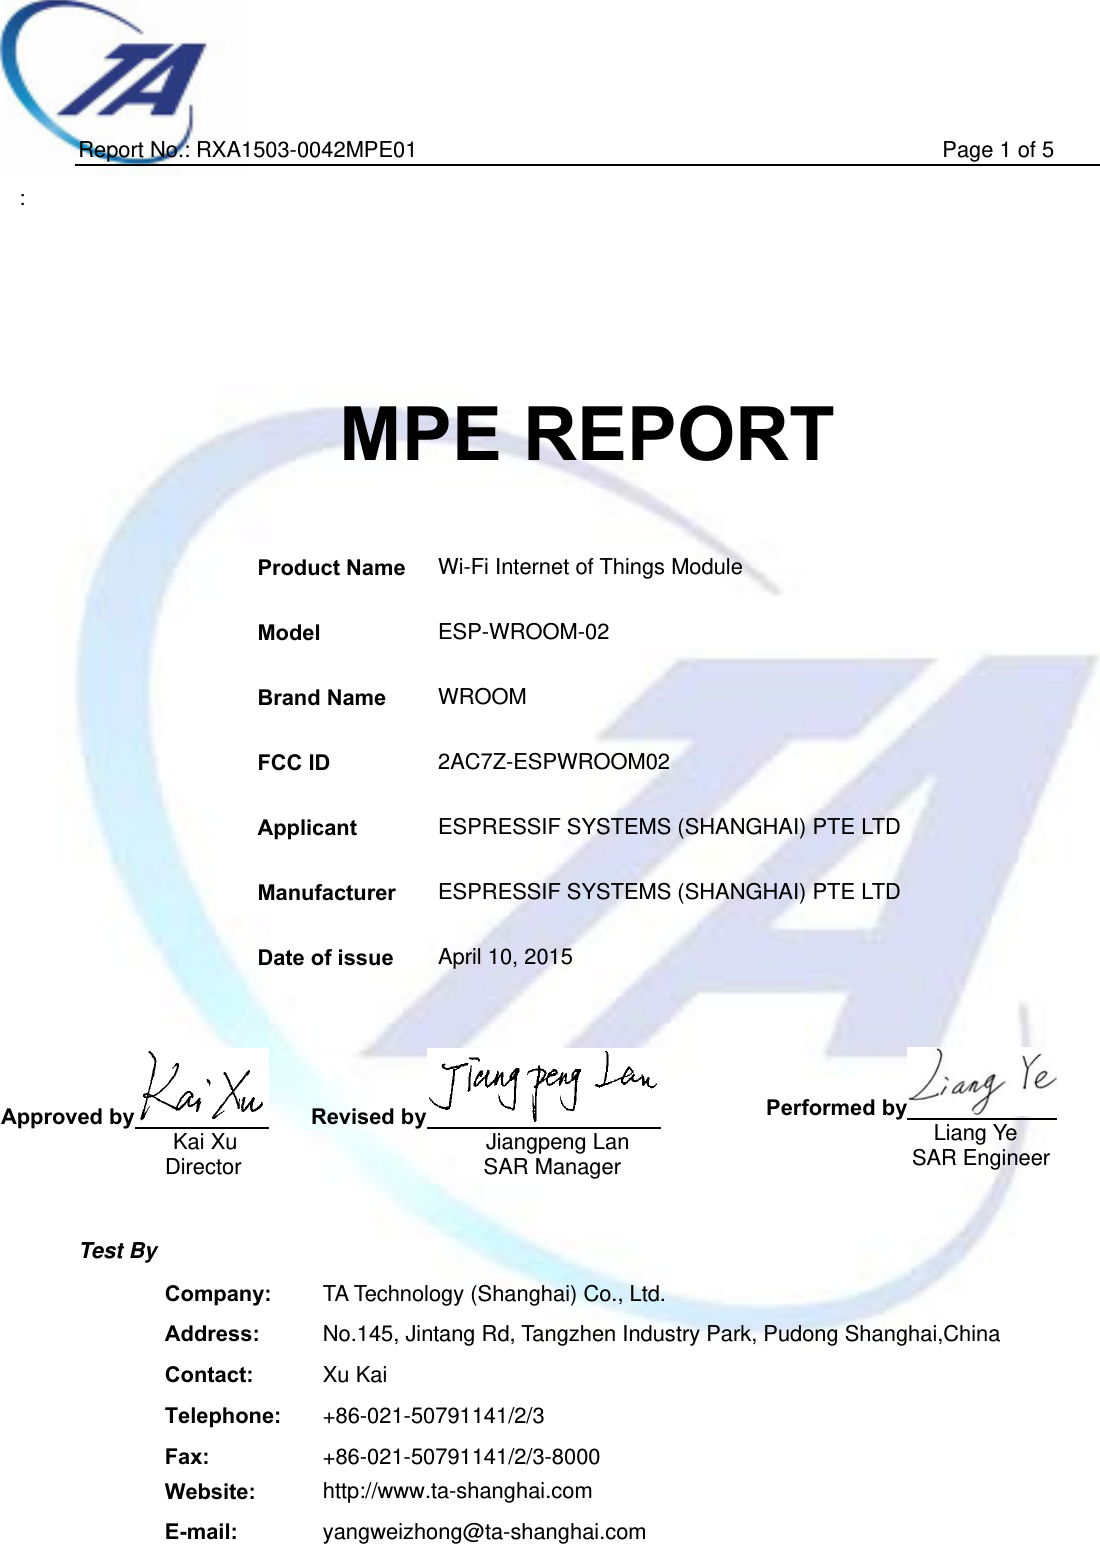   Report No.: RXA1503-0042MPE01                                                Page 1 of 5  :         MPE REPORT    Product Name  Wi-Fi Internet of Things Module Model  ESP-WROOM-02 Brand Name  WROOM FCC ID  2AC7Z-ESPWROOM02   Applicant  ESPRESSIF SYSTEMS (SHANGHAI) PTE LTD Manufacturer  ESPRESSIF SYSTEMS (SHANGHAI) PTE LTD Date of issue  April 10, 2015     Approved by    Kai Xu Director  Revised by  Jiangpeng Lan SAR Manager Performed by       Liang Ye       SAR Engineer   Test By  Company:  TA Technology (Shanghai) Co., Ltd. Address:  No.145, Jintang Rd, Tangzhen Industry Park, Pudong Shanghai,China Contact:  Xu Kai Telephone:  +86-021-50791141/2/3 Fax:  +86-021-50791141/2/3-8000 Website:  http://www.ta-shanghai.com E-mail:  yangweizhong@ta-shanghai.com 